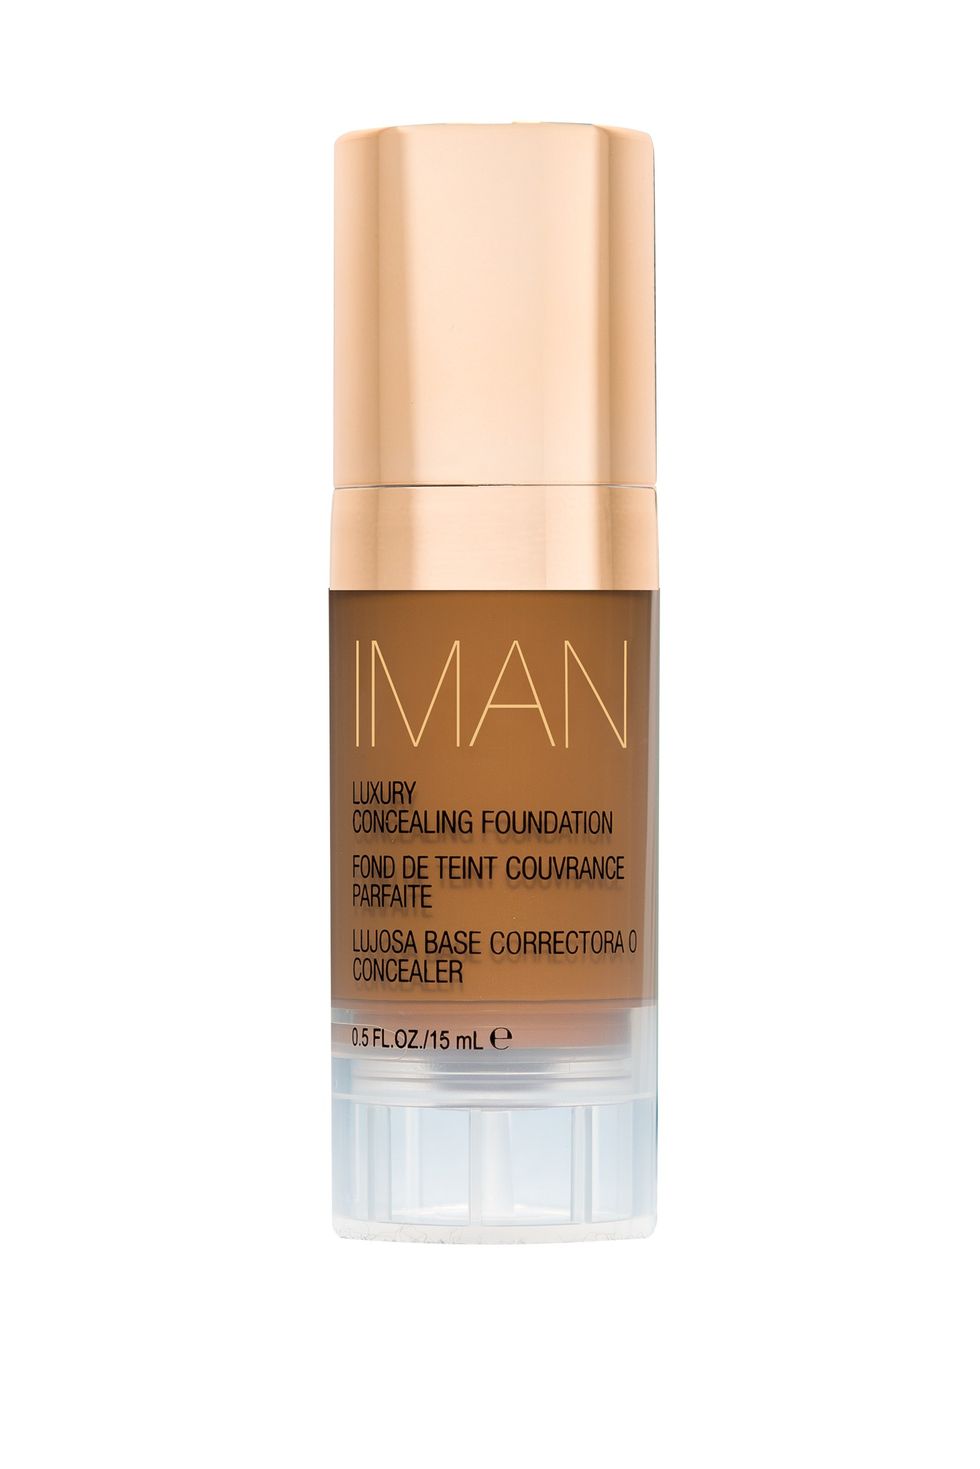 Iman Luxury Concealing Foundation